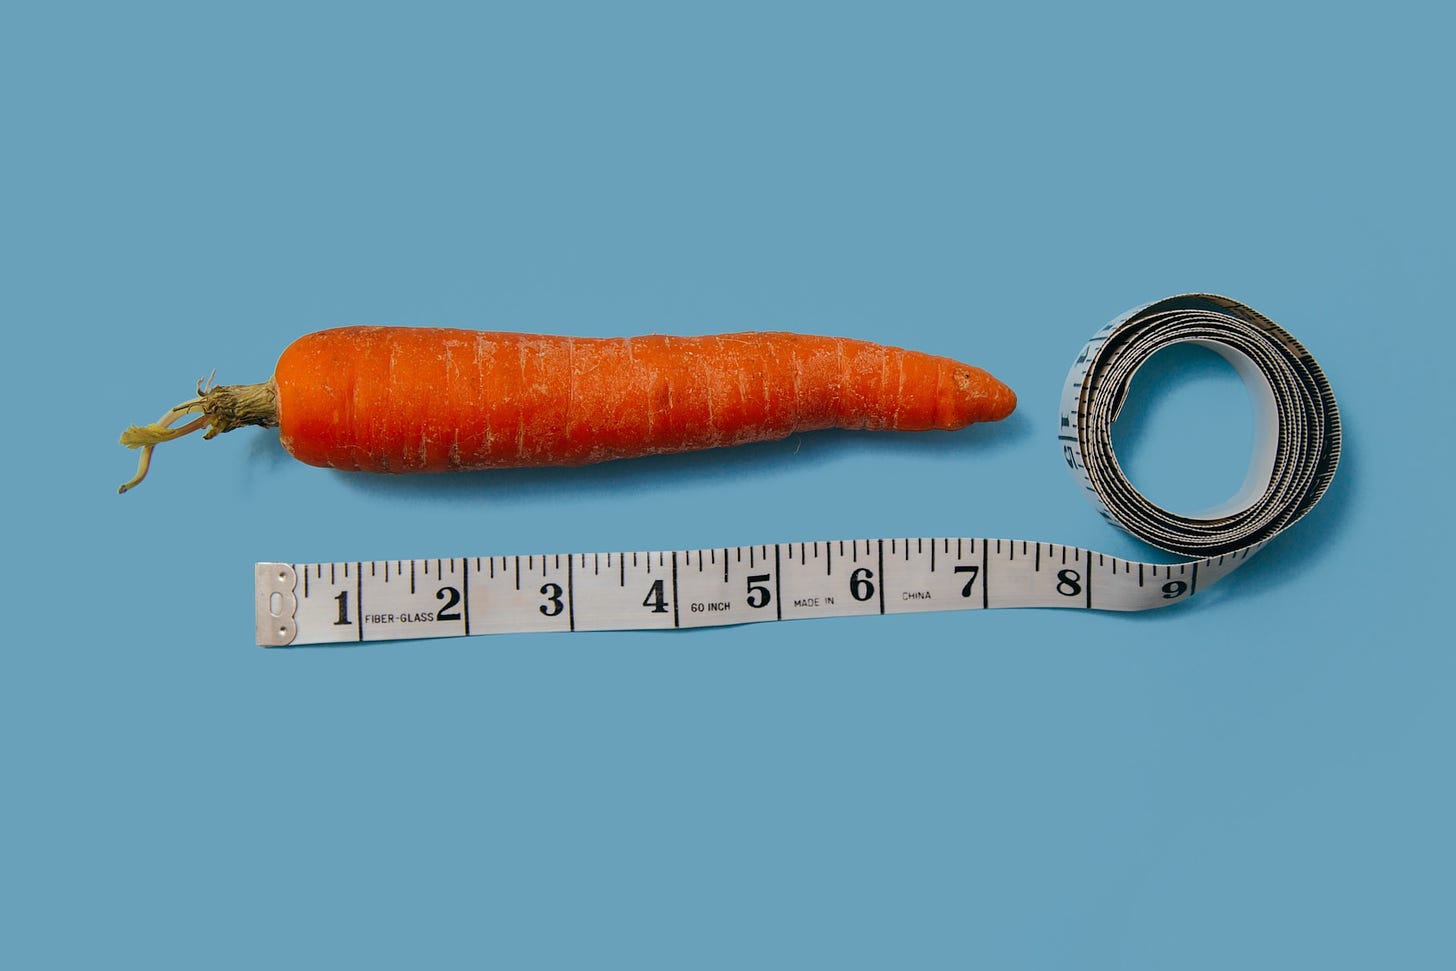 Photo of a carrot and measuring stick on a blue surface